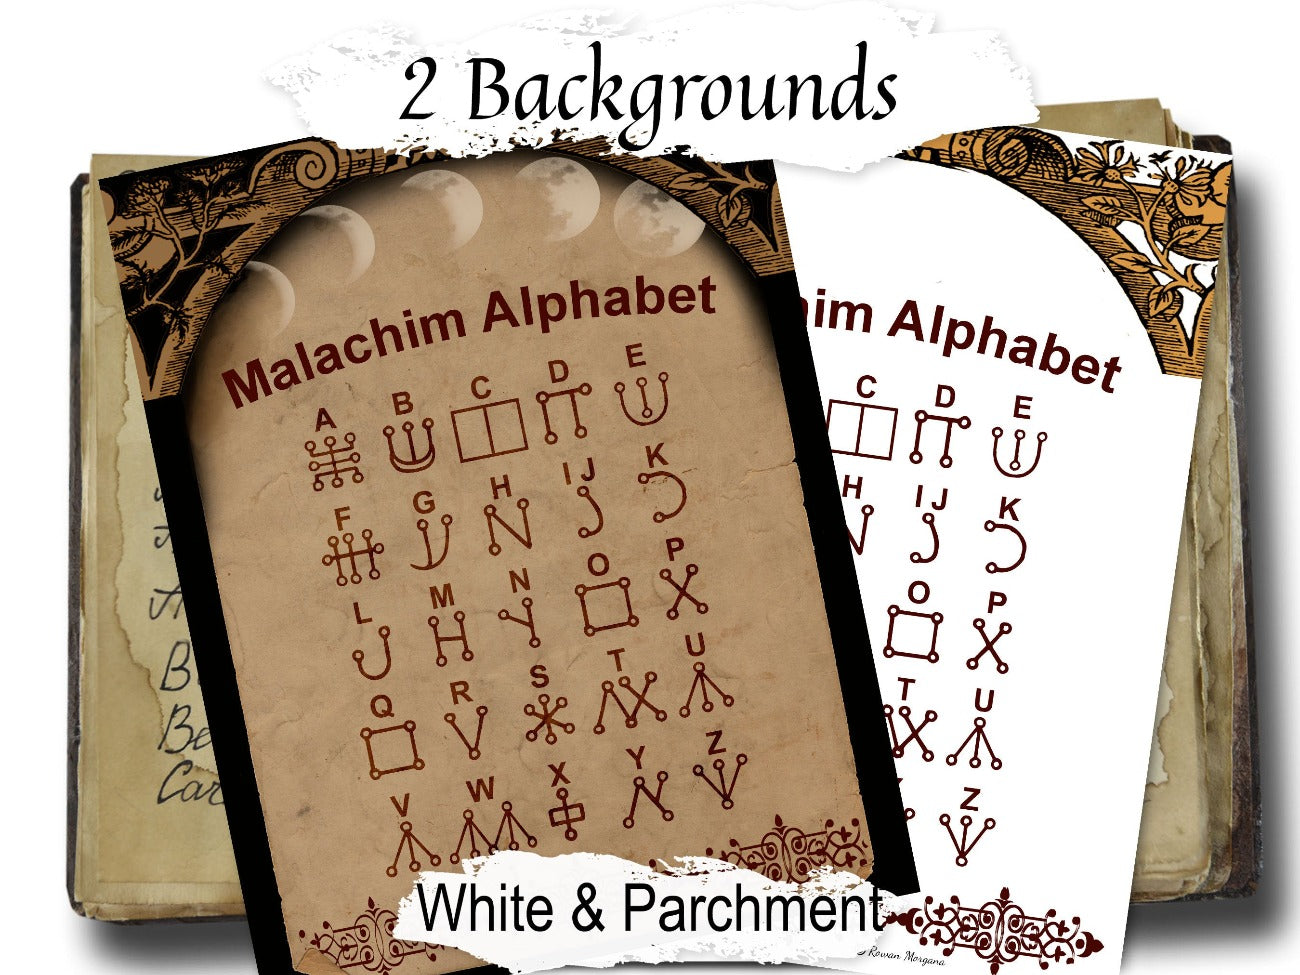 MALACHIM ALPHABET, Celestial Writing of Angels and Messengers, Secret Witchcraft Script, Ancient Wicca Alphabet for Spells and Incantations - Morgana Magick Spell